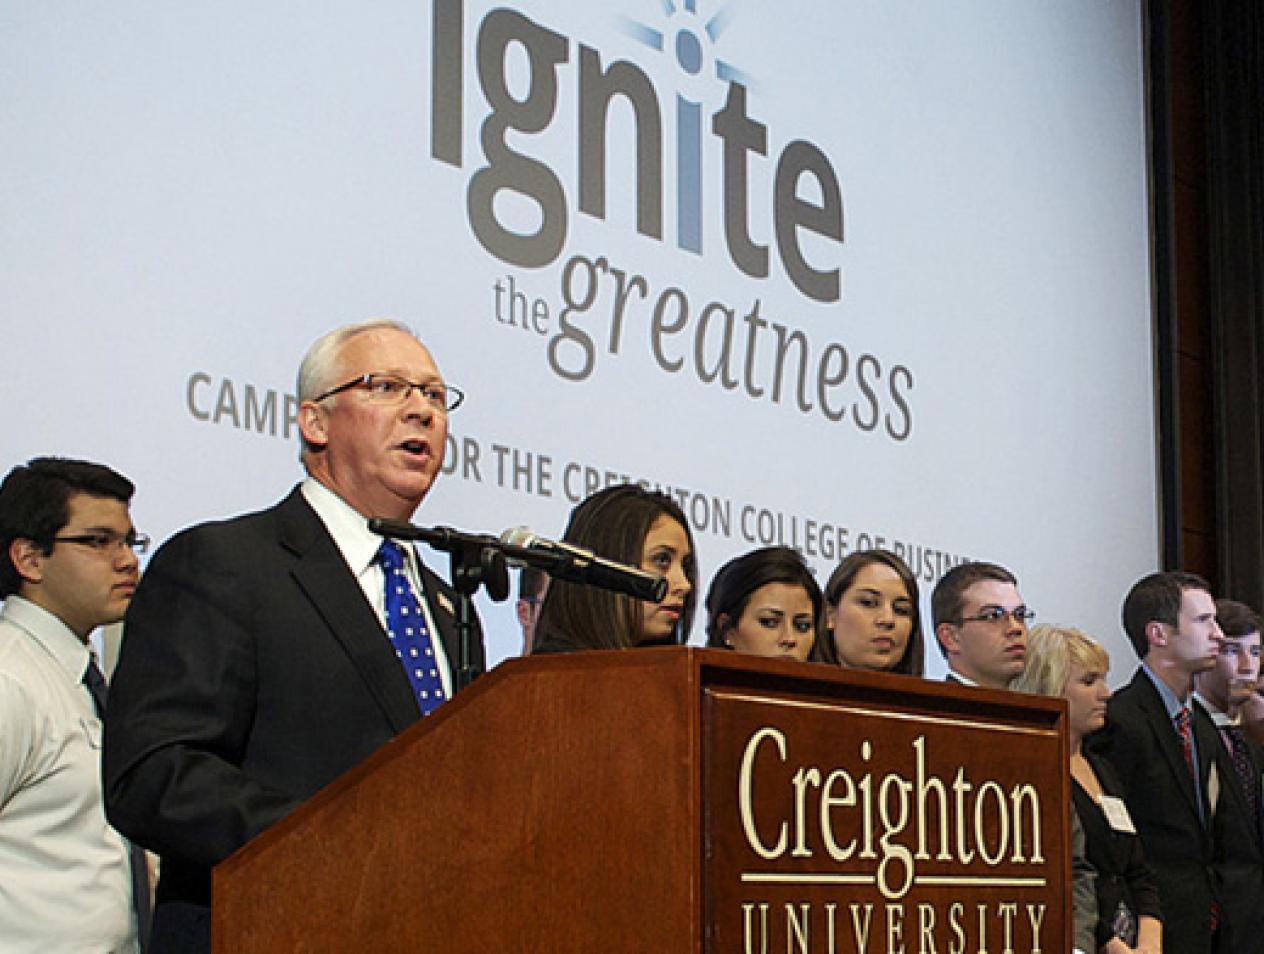 ignite-the-greatness2